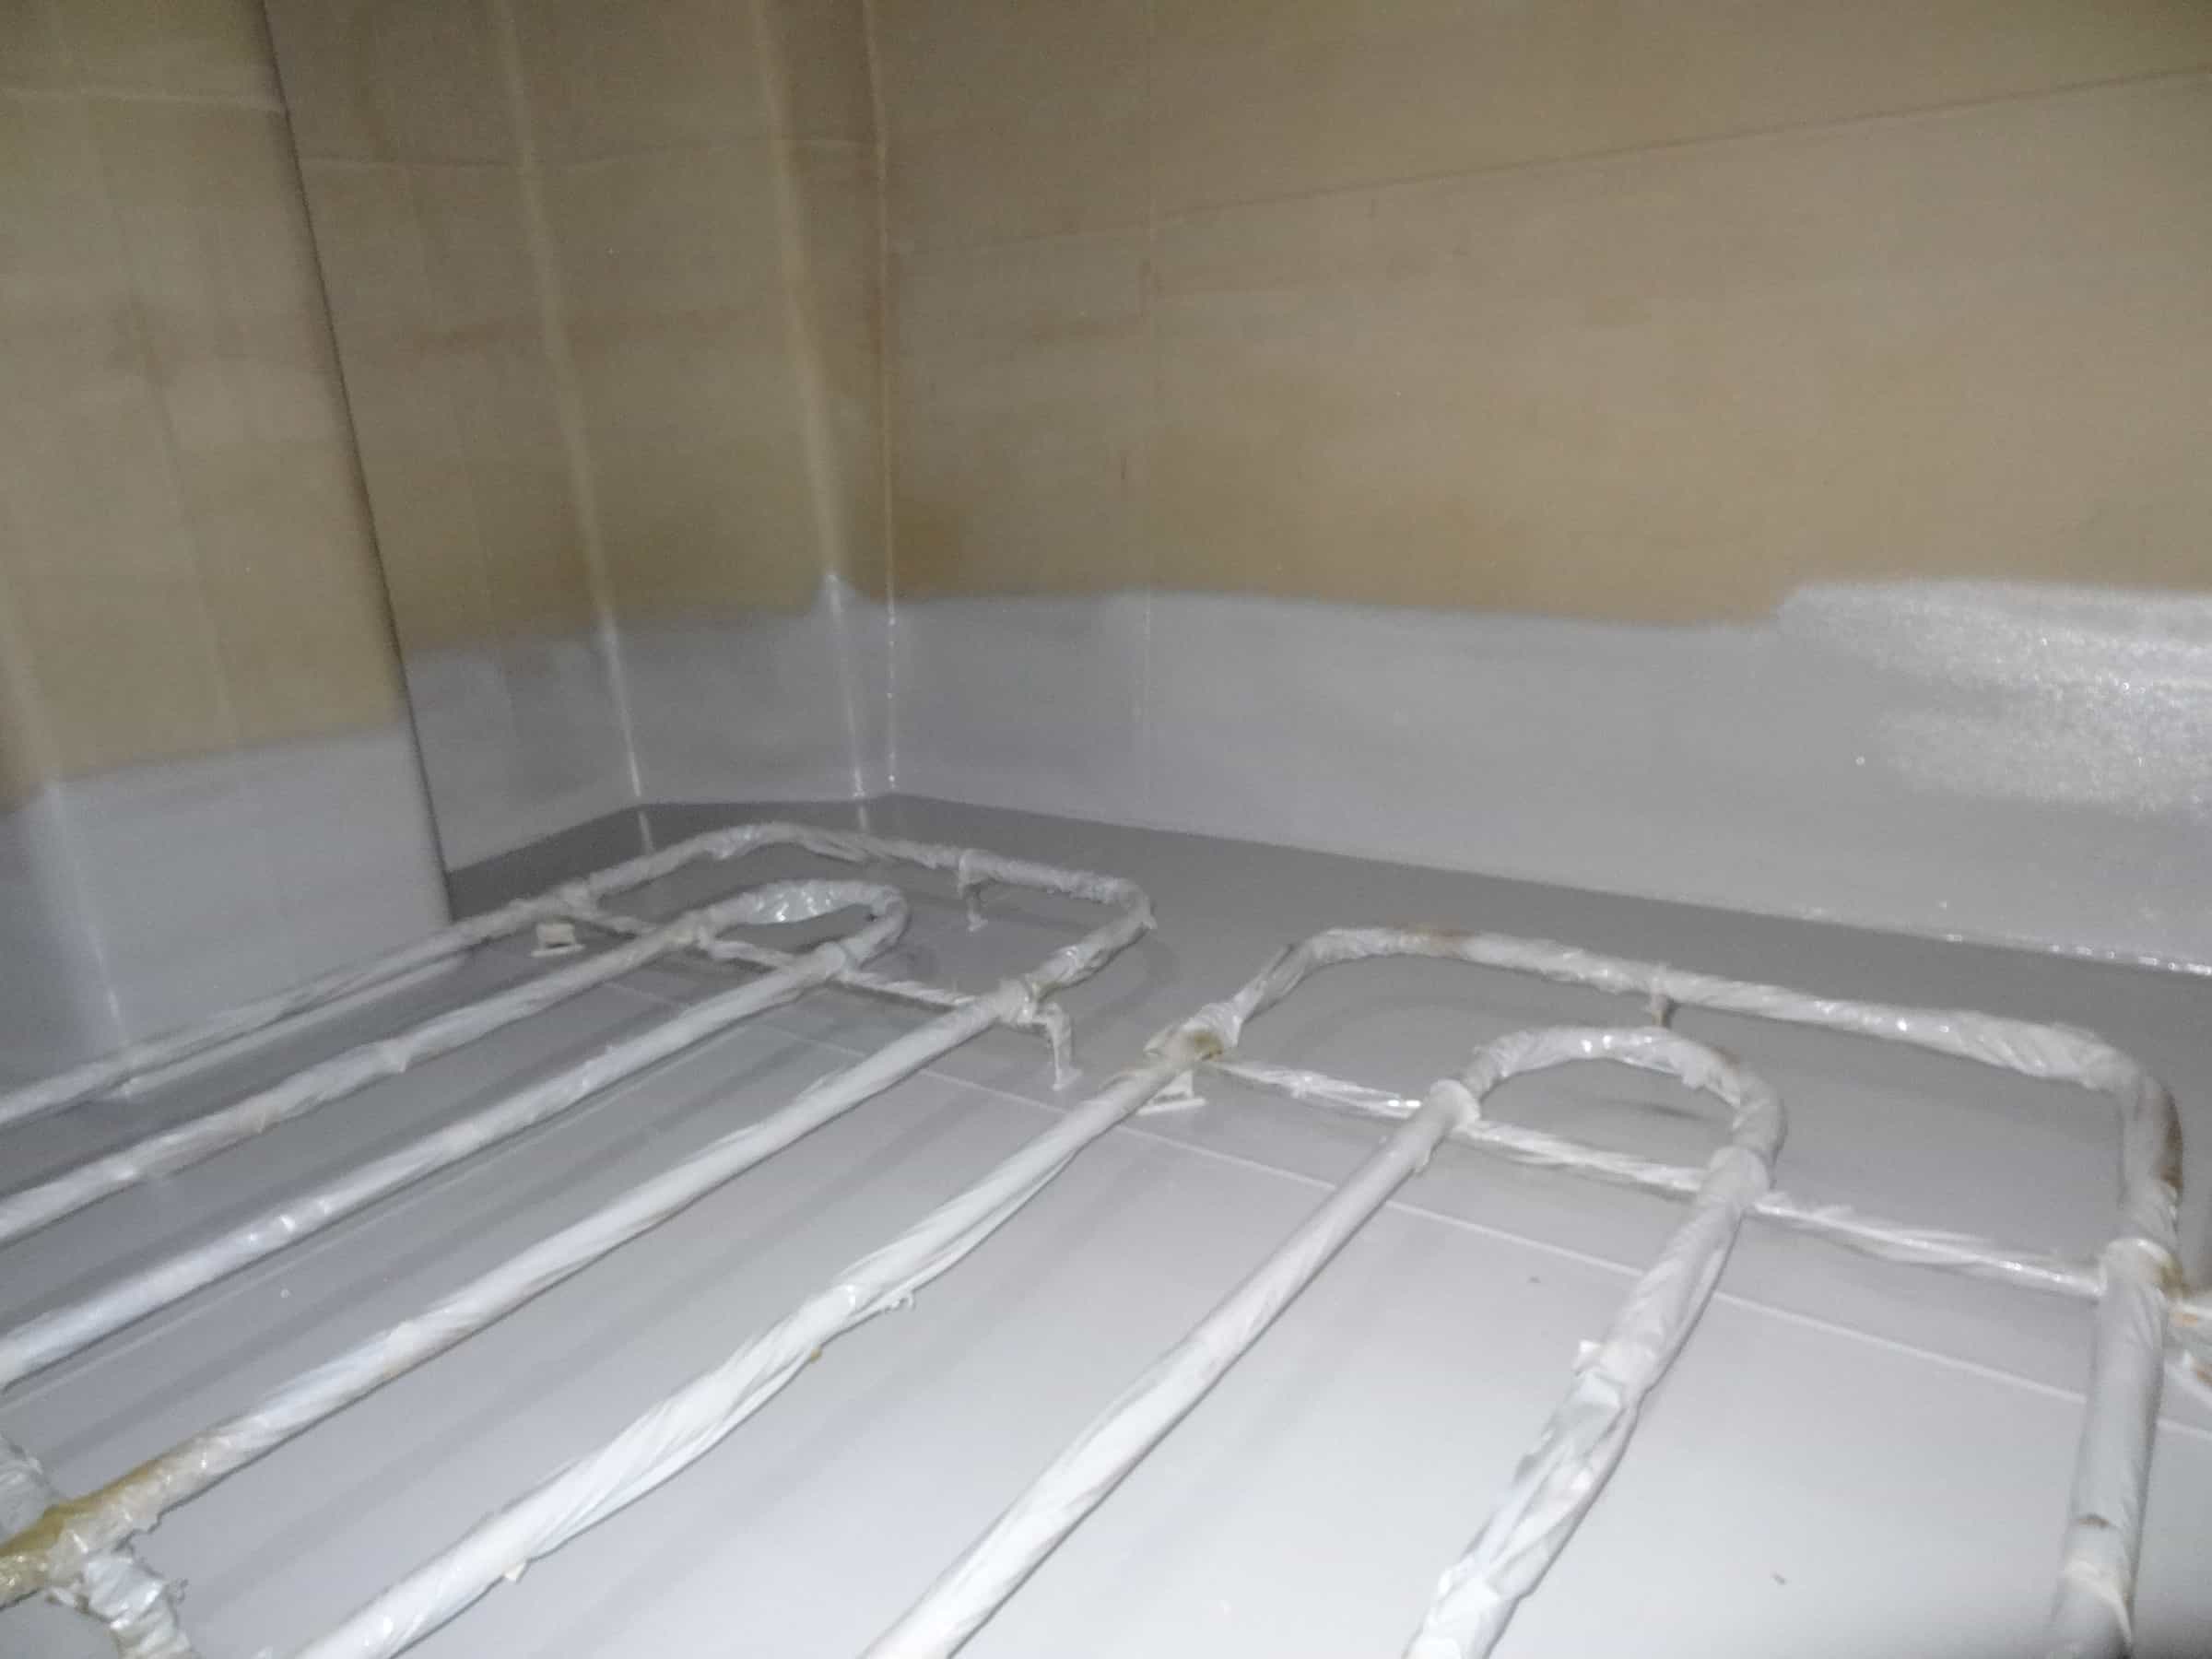 chemical tank floor, walls and piping painted grey